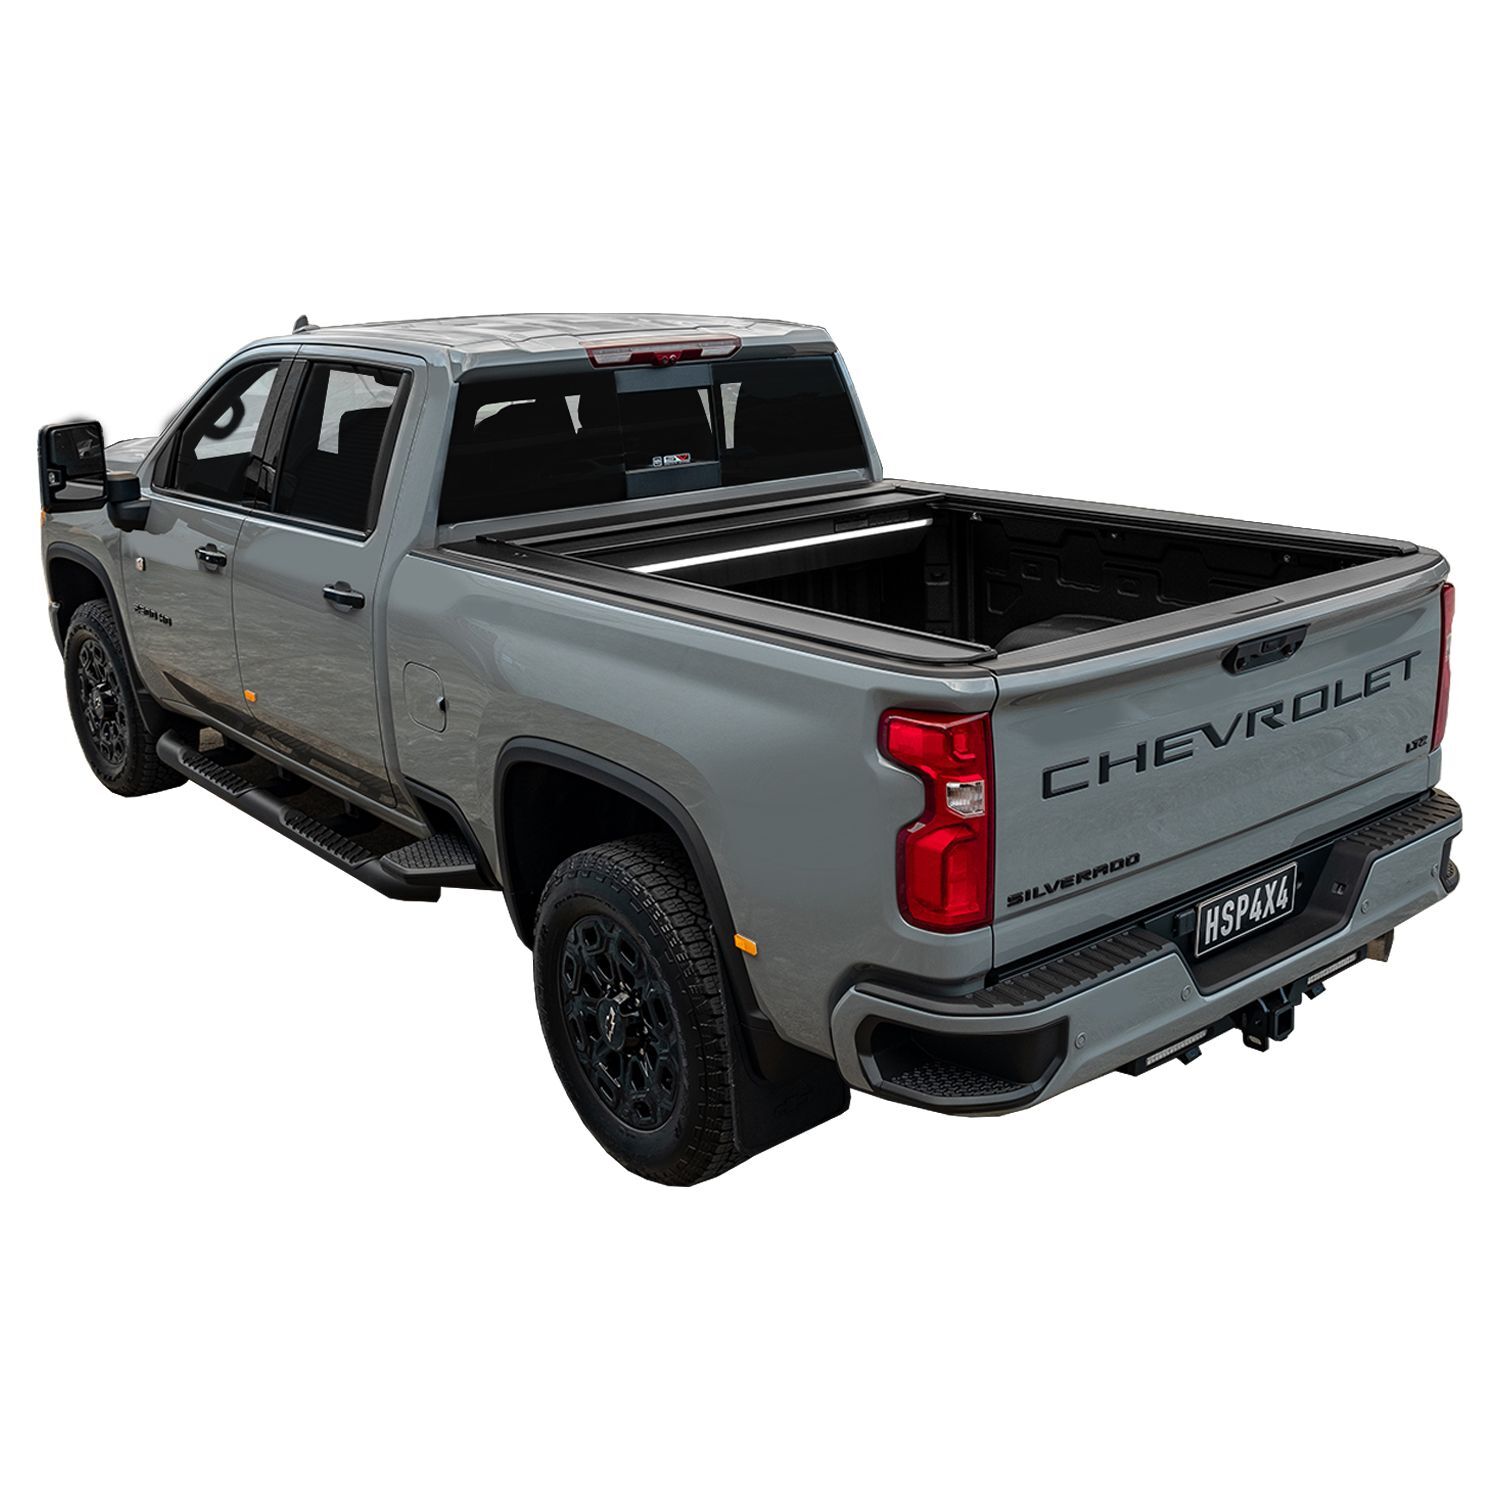 HSP ROLL R COVER SERIES 3.5 TO SUIT CHEVROLET SILVERADO 2500 (2023-ON)